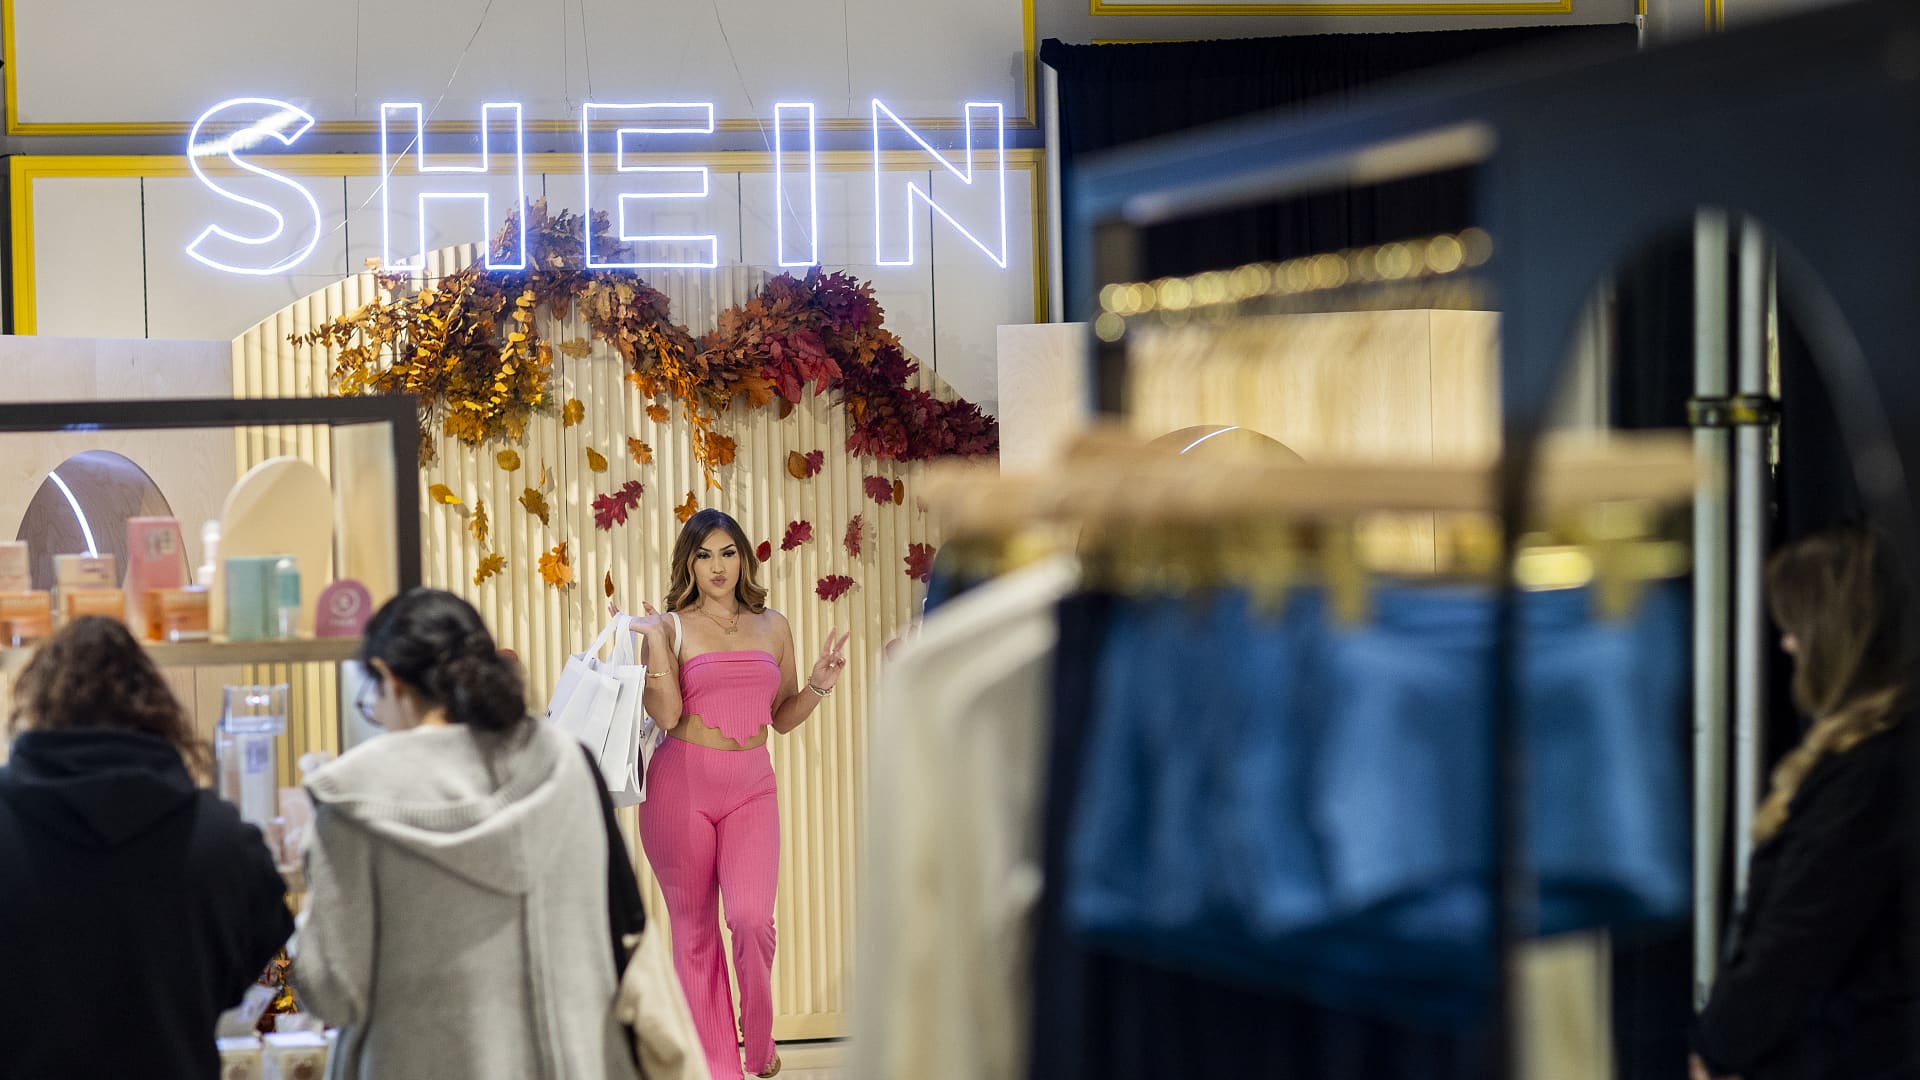 Shein’s U.S. charm offensive and IPO could hinge on NRF membership. So far, it’s been rejected